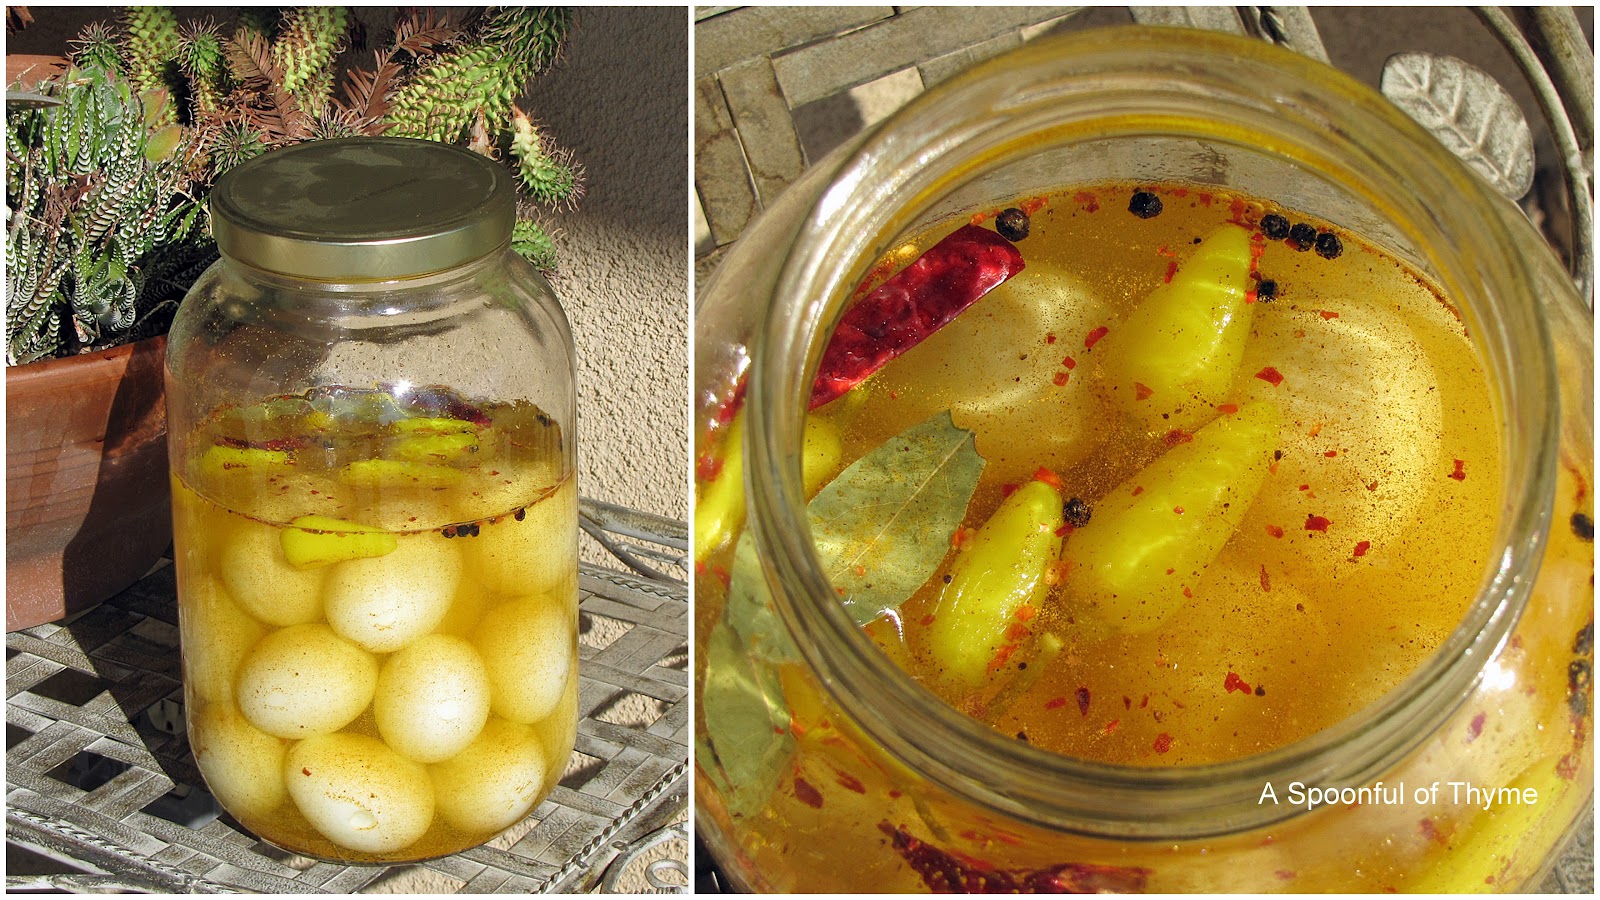 Where are recipes for pickled eggs?